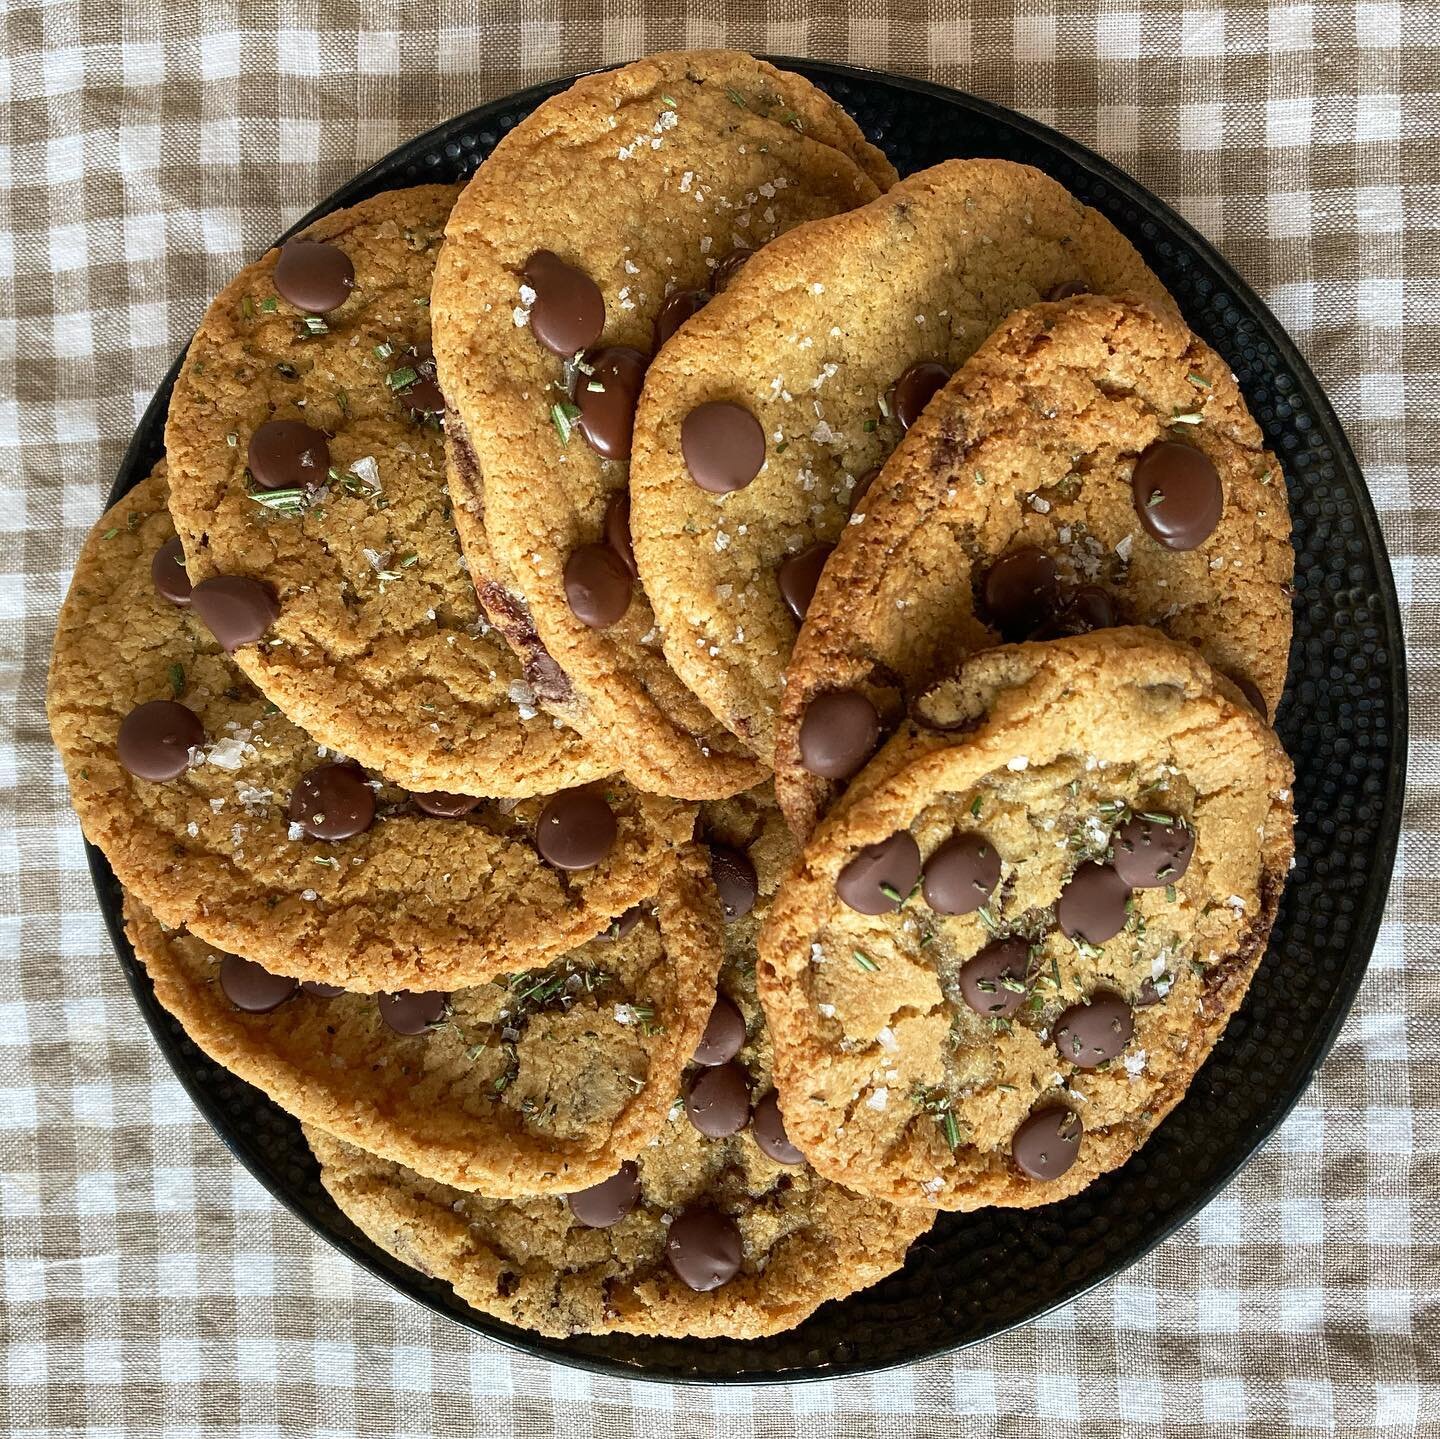 Something bit different at cafe wynd today&hellip;cookies!!!!
These are dark chocolate, rosemary and sea salt cookies with no gluten containing ingredients!!🤤
#cookielovers #cookies #sweetandsalty #nogluten #cafe #totallylocallydunfermline #dunferml